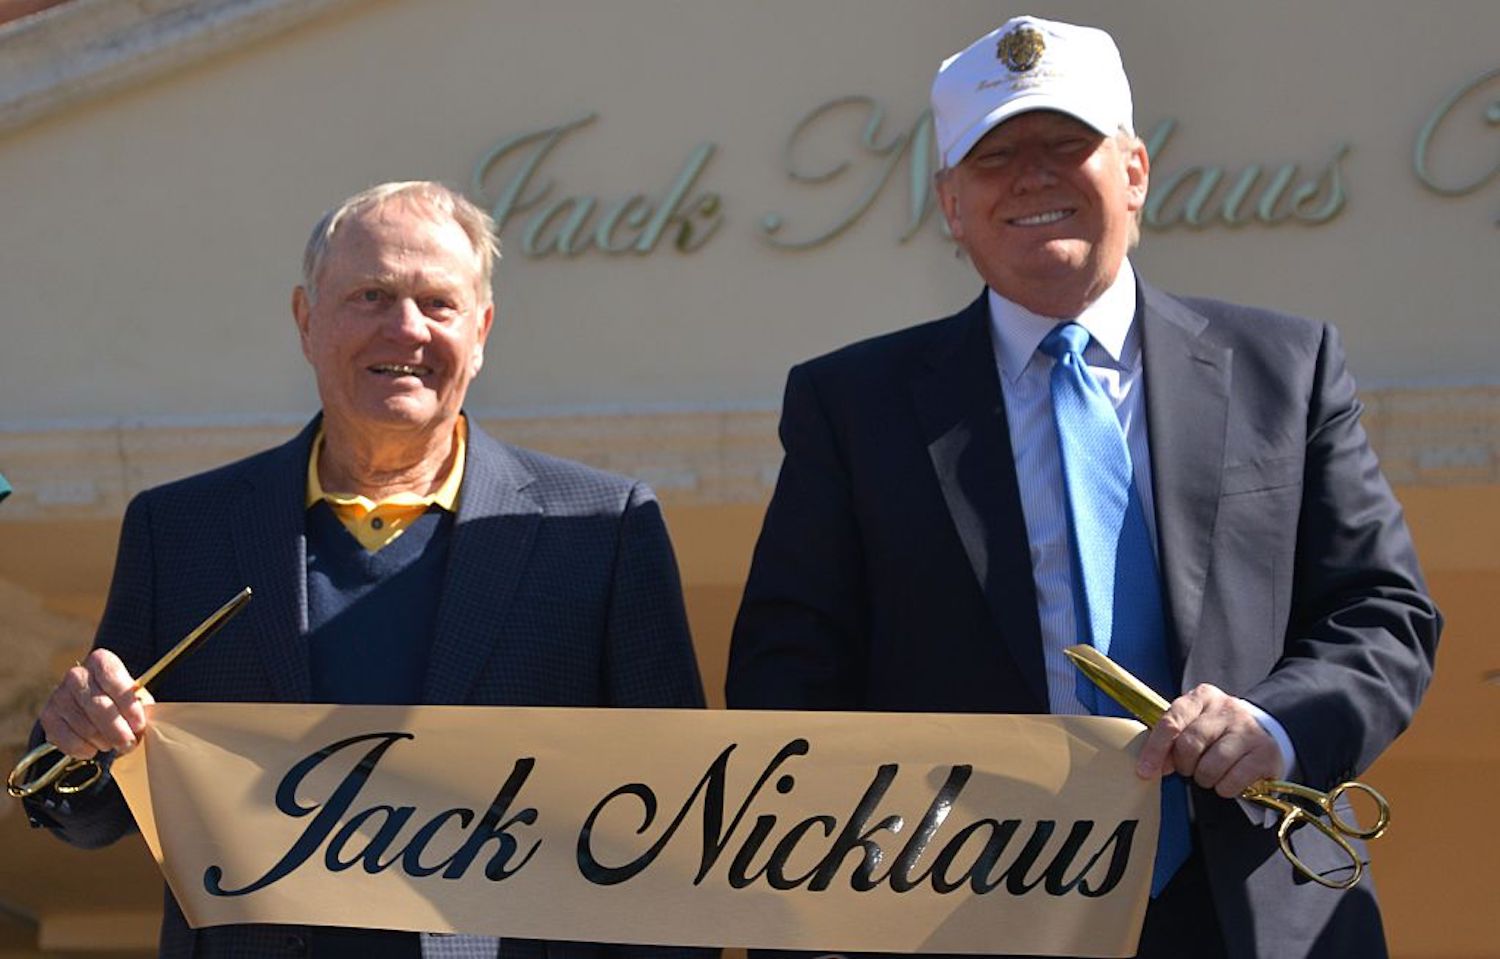 Hall of Famer Jack Nicklaus publicily endorsed Donald Trump on Wednesday, which spurred backlash from celebrities and sports figures alike.